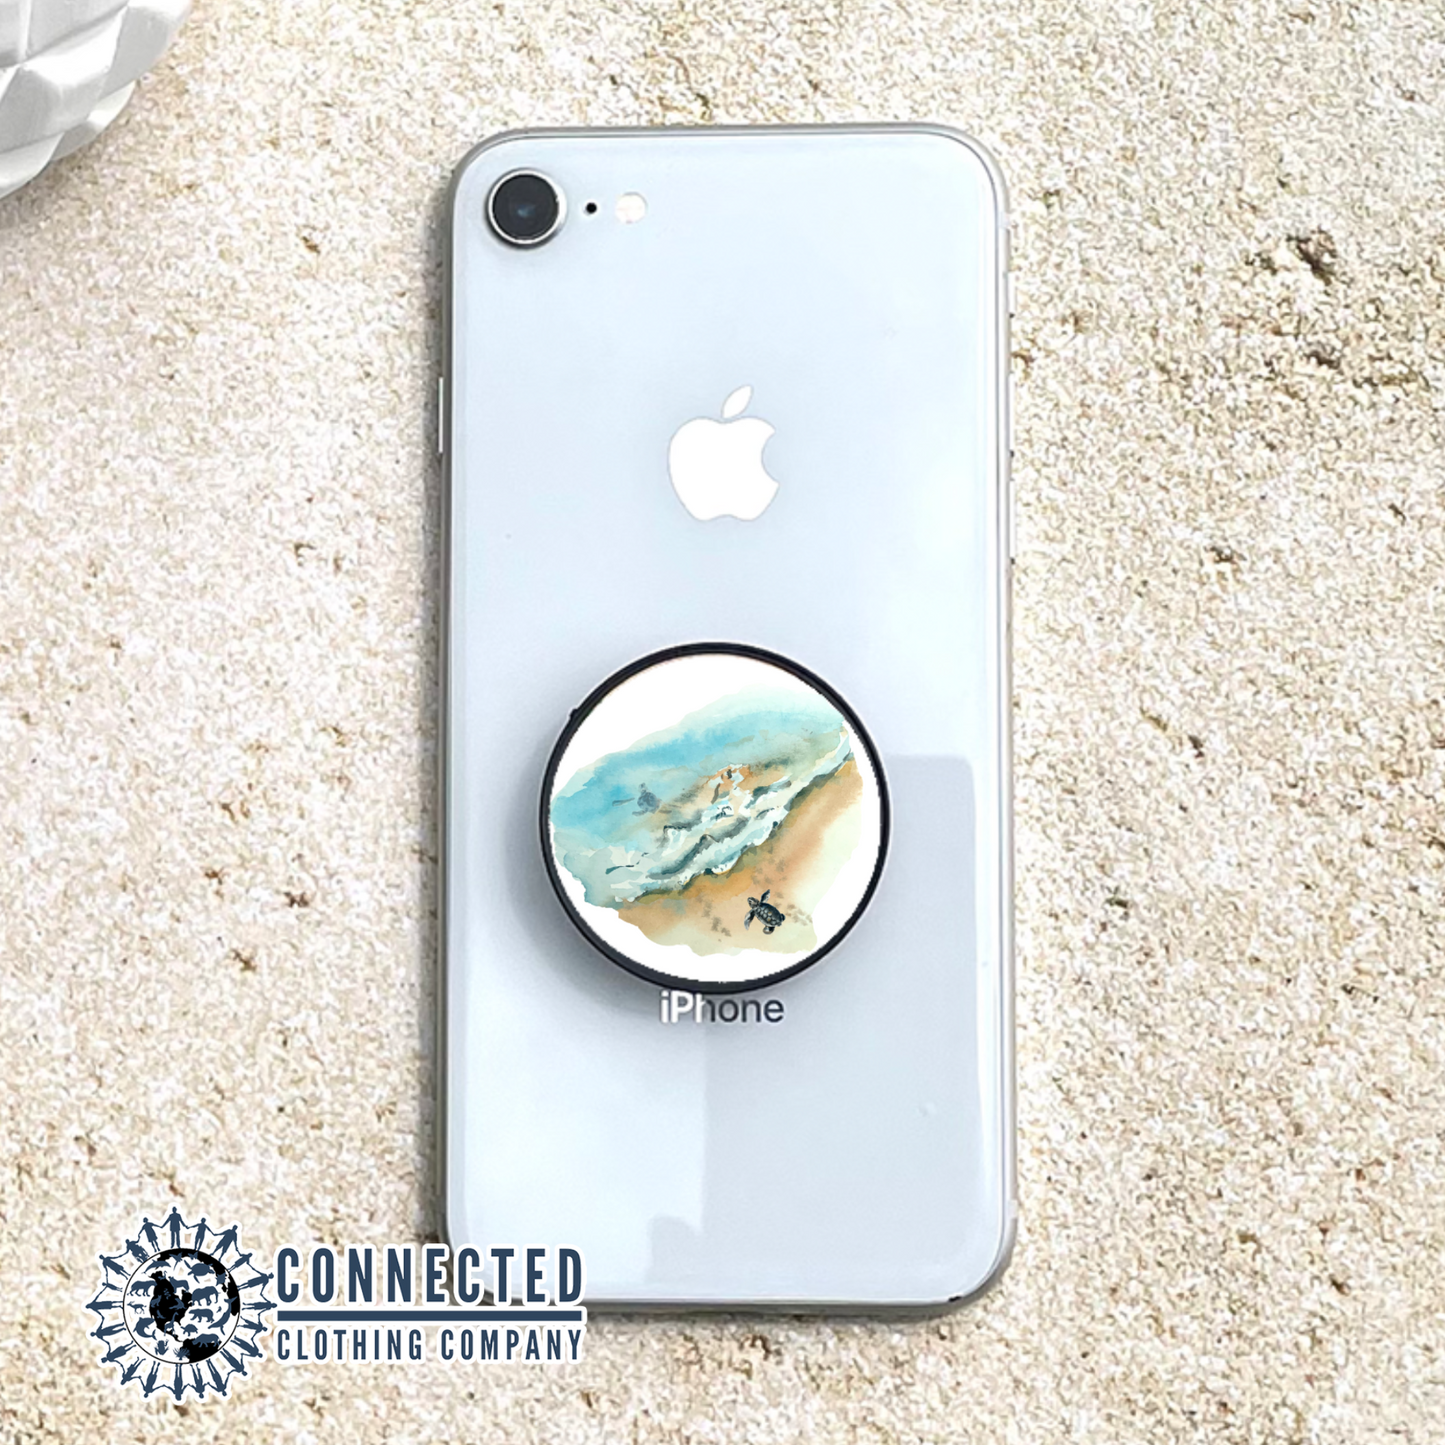 Sea Turtle Hatchling Phone Grip - Connected Clothing Company - 10% of proceeds donated to ocean conservation